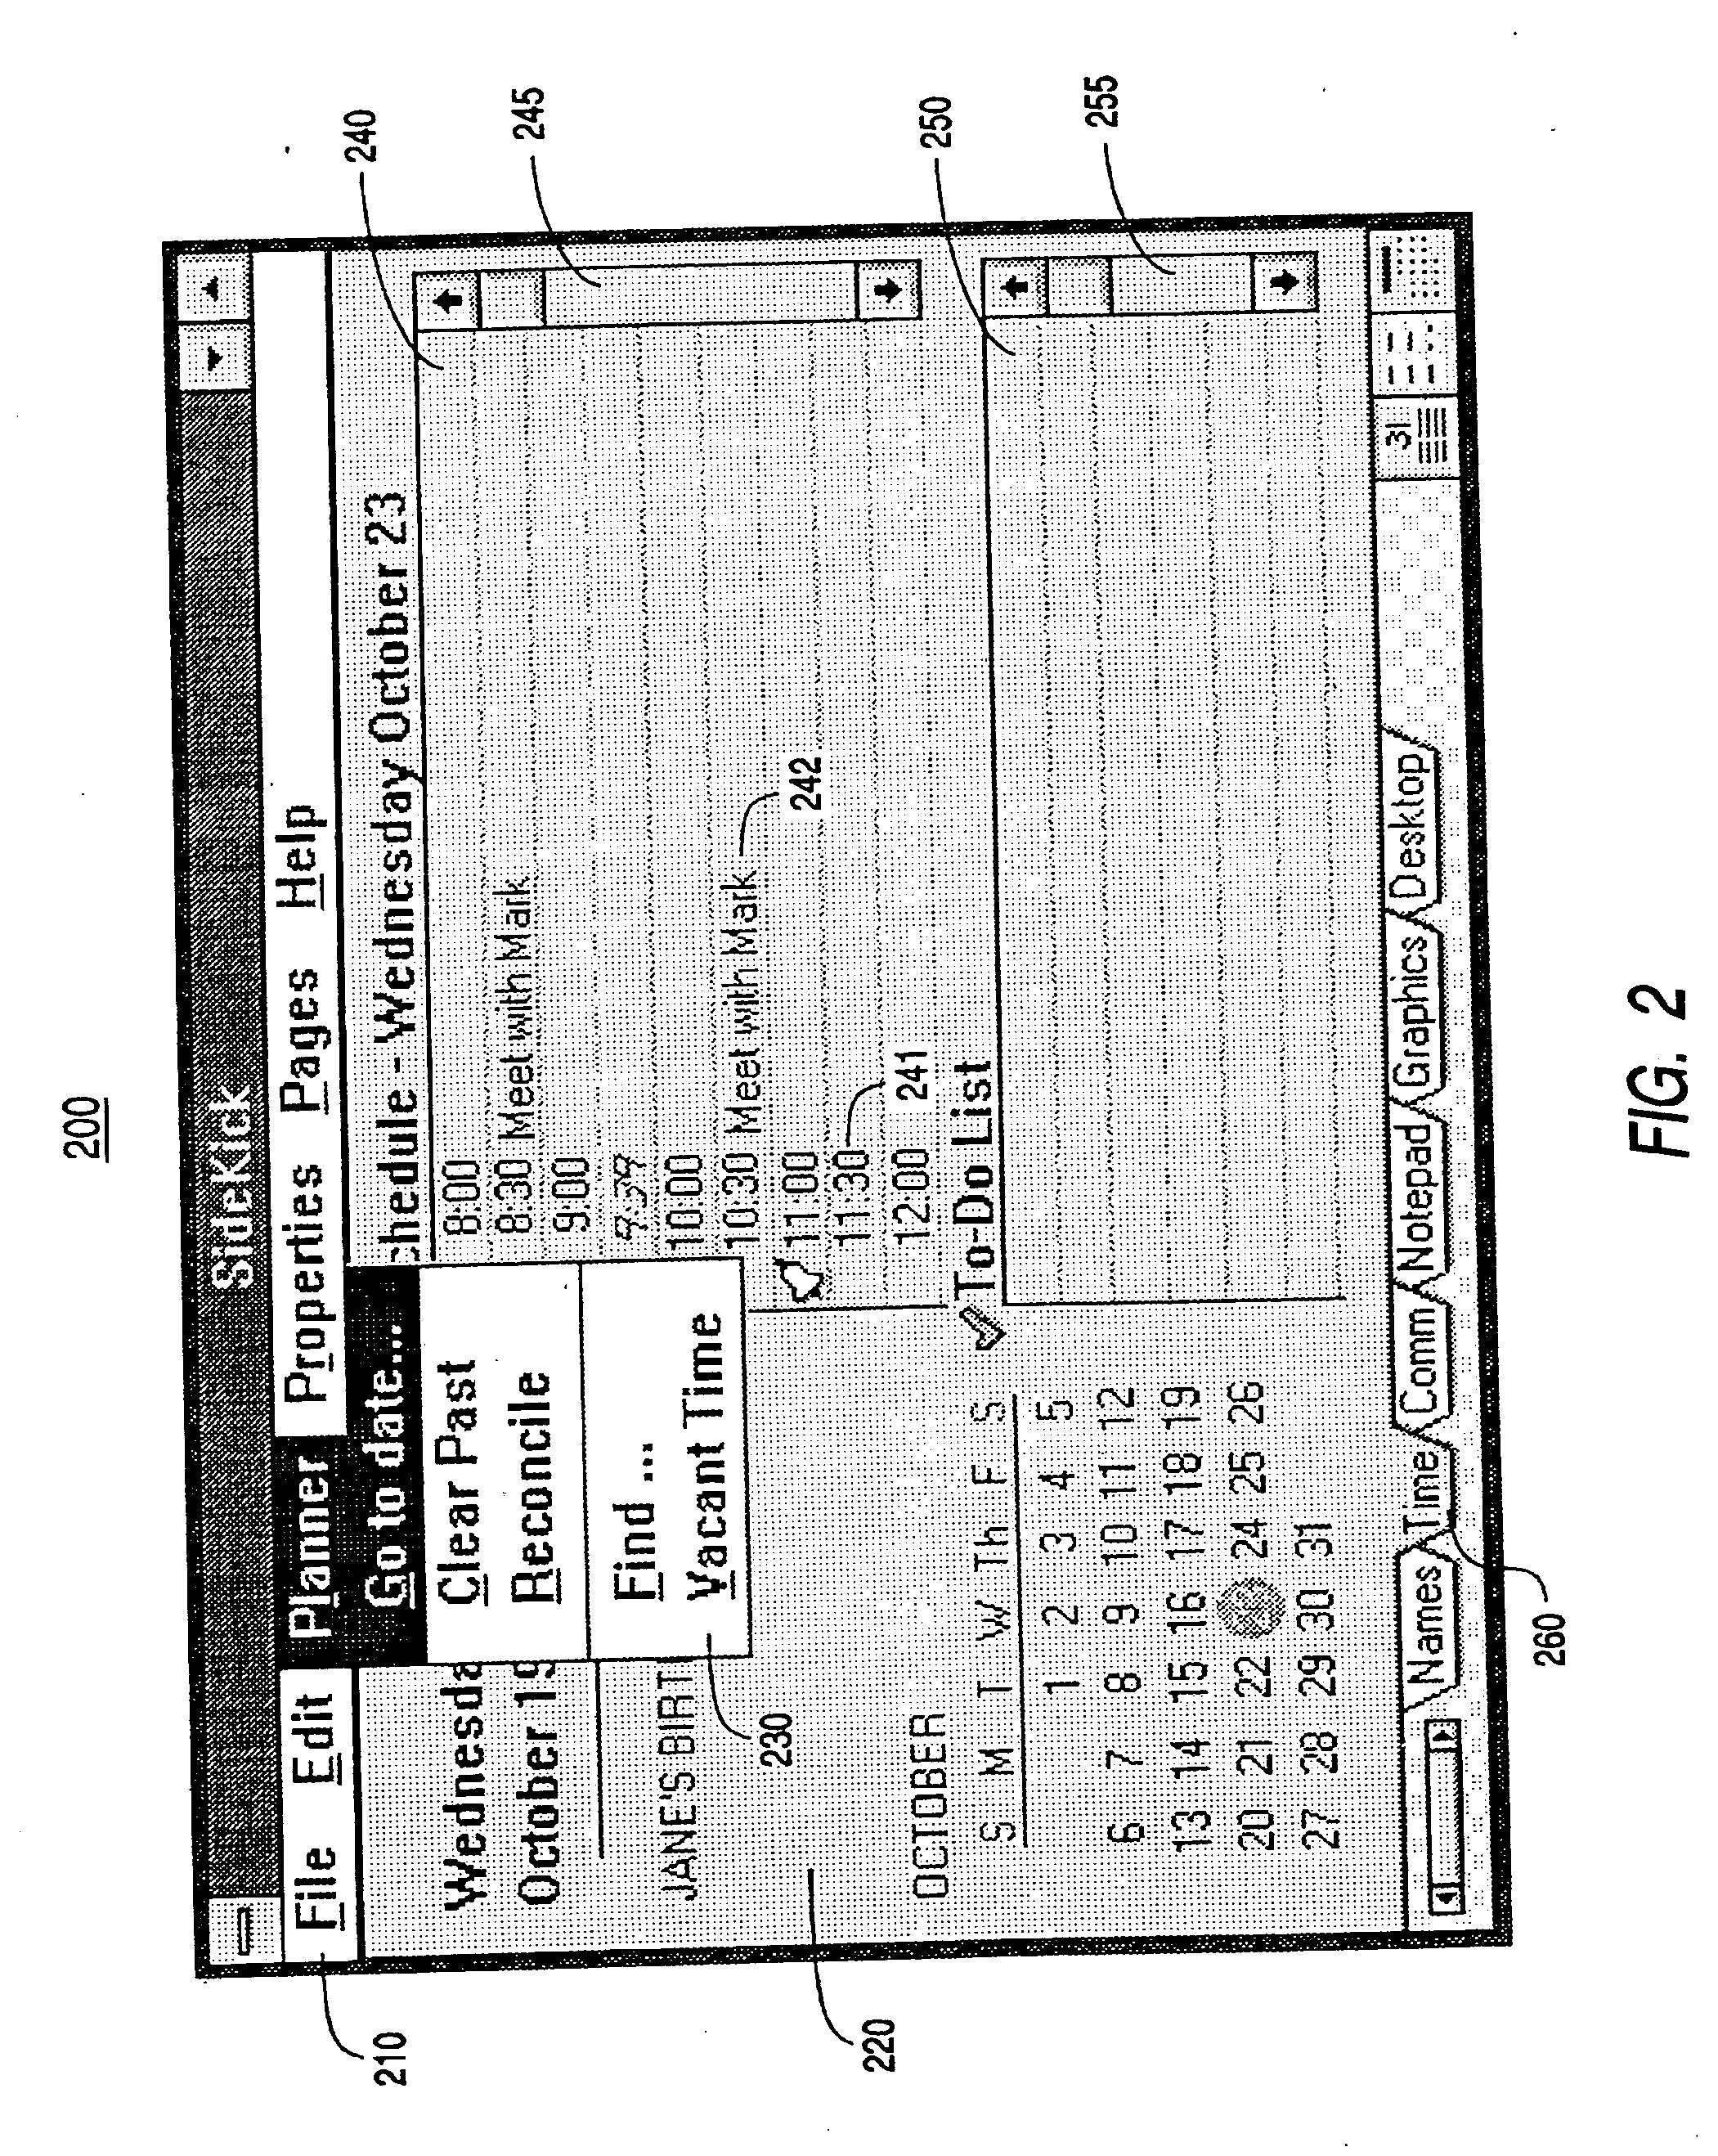 Method and apparatus for previewing changes in color palette